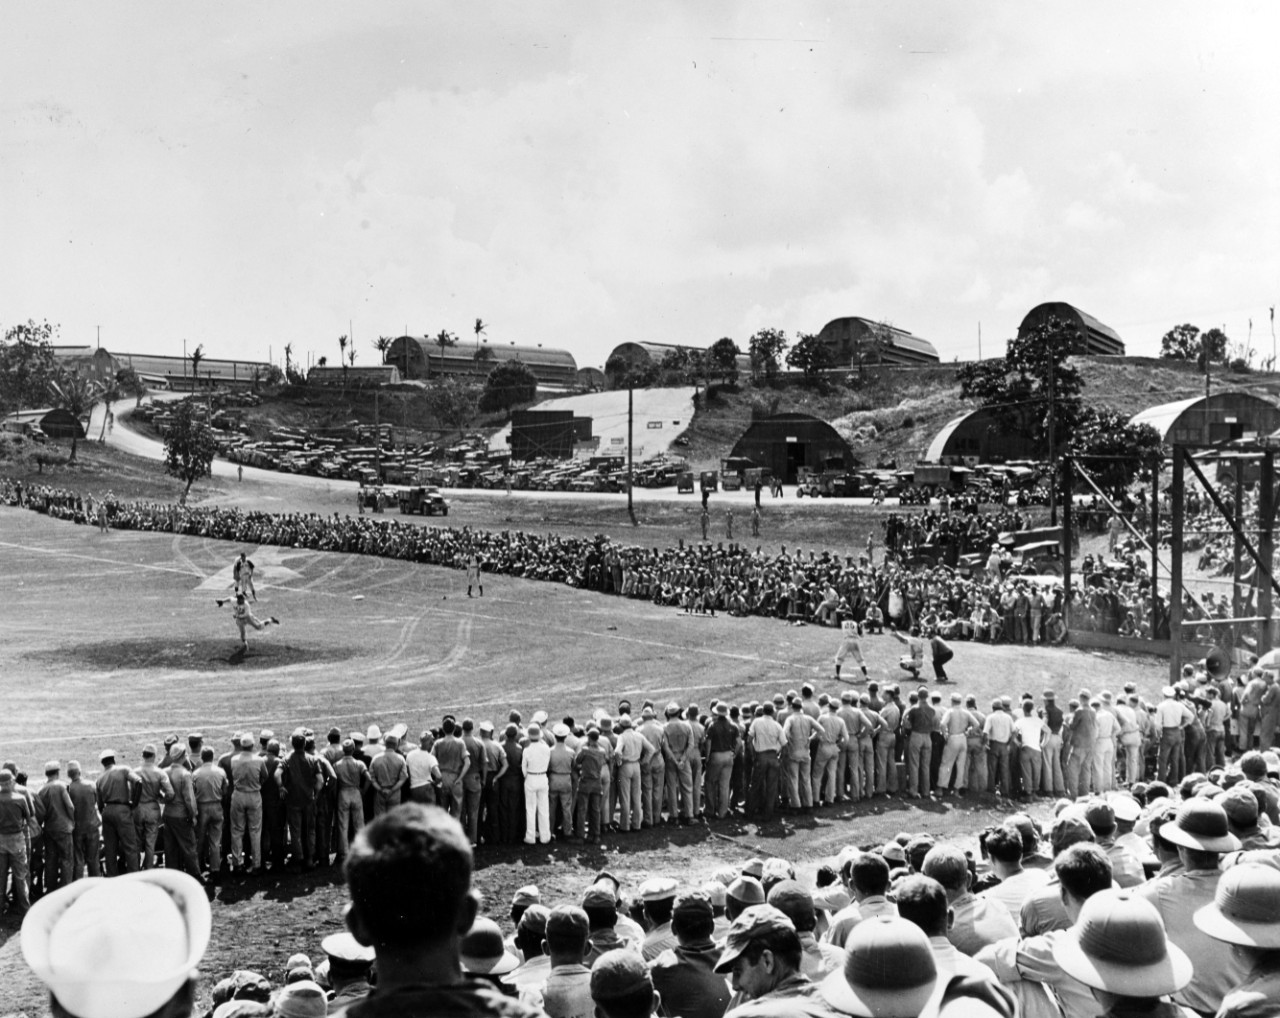 Exhibition baseball game at the dedication of Geiger Field, CINCPAC-CINCPOA Headquarters, Guam, February 1945.